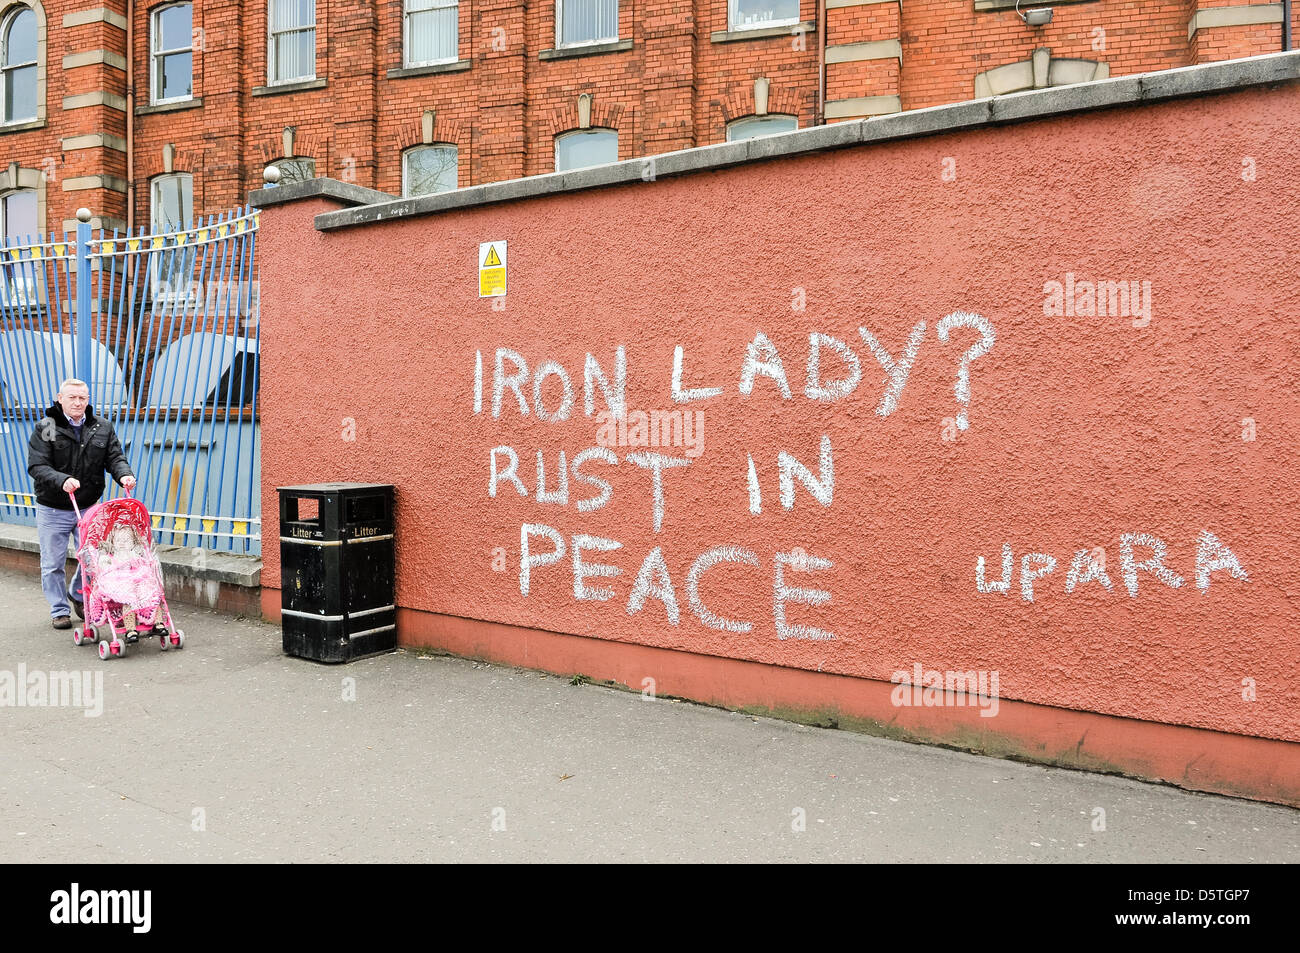 Belfast, UK. 9th April 2013. Following a street party in the area, anti-Thatcher graffiti appears on walls throughout West Belfast. Credit: Stephen Barnes / Alamy Live News Stock Photo